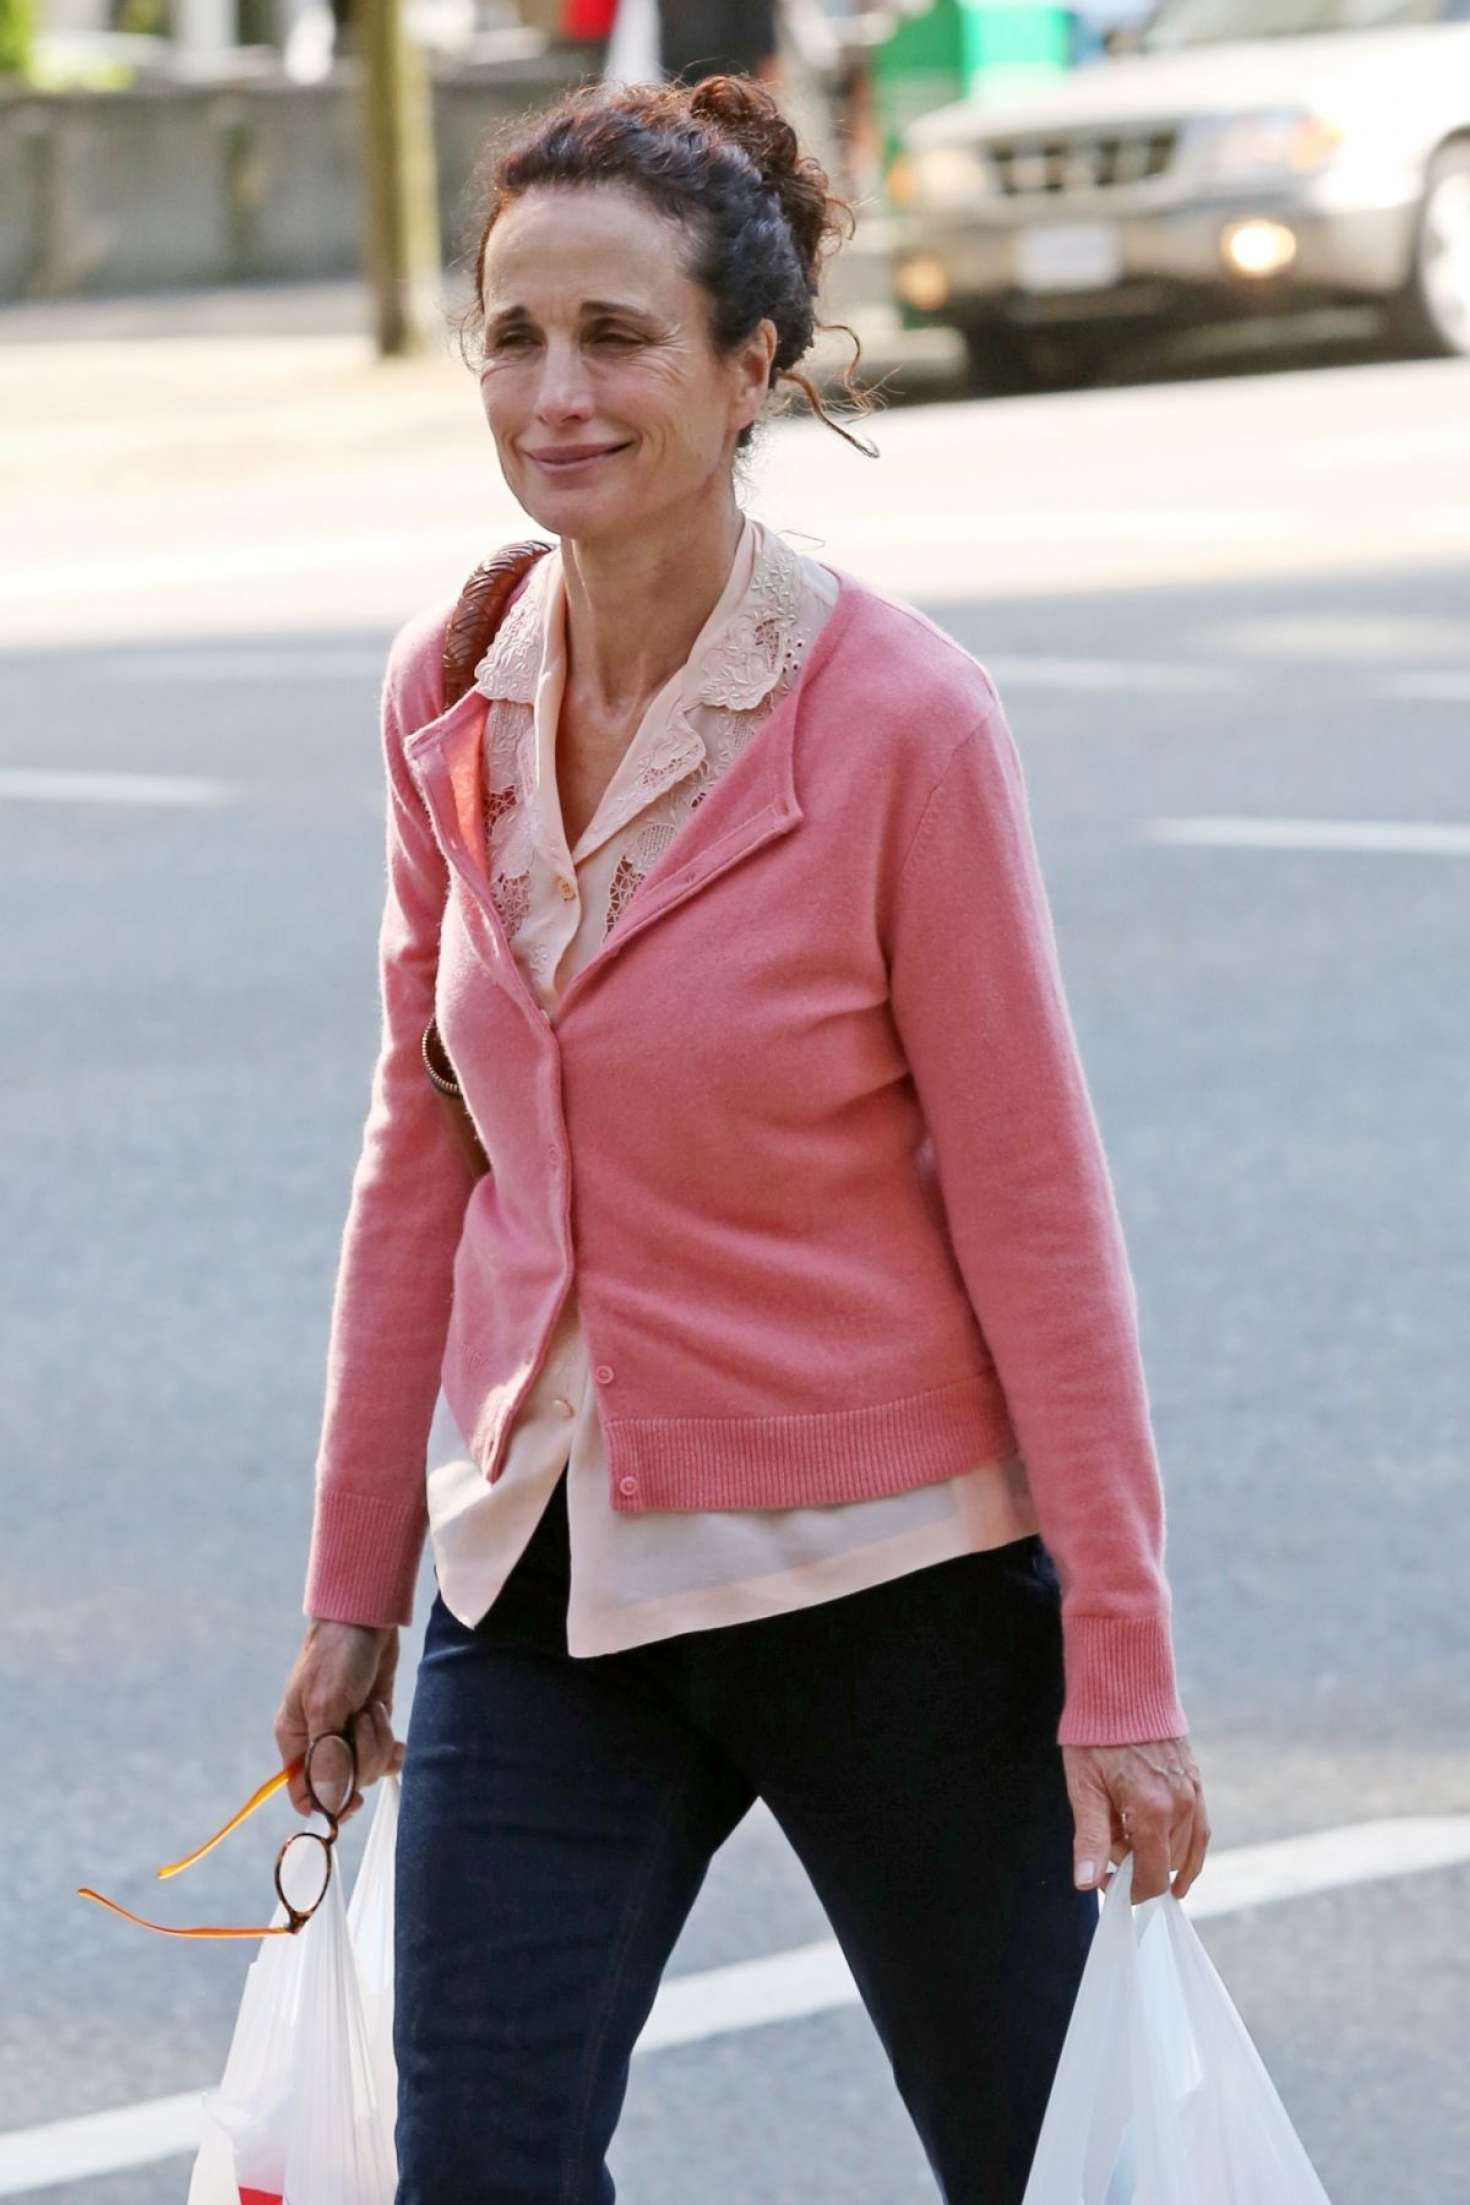 Andie Macdowell Out Shopping in Vancouver | GotCeleb